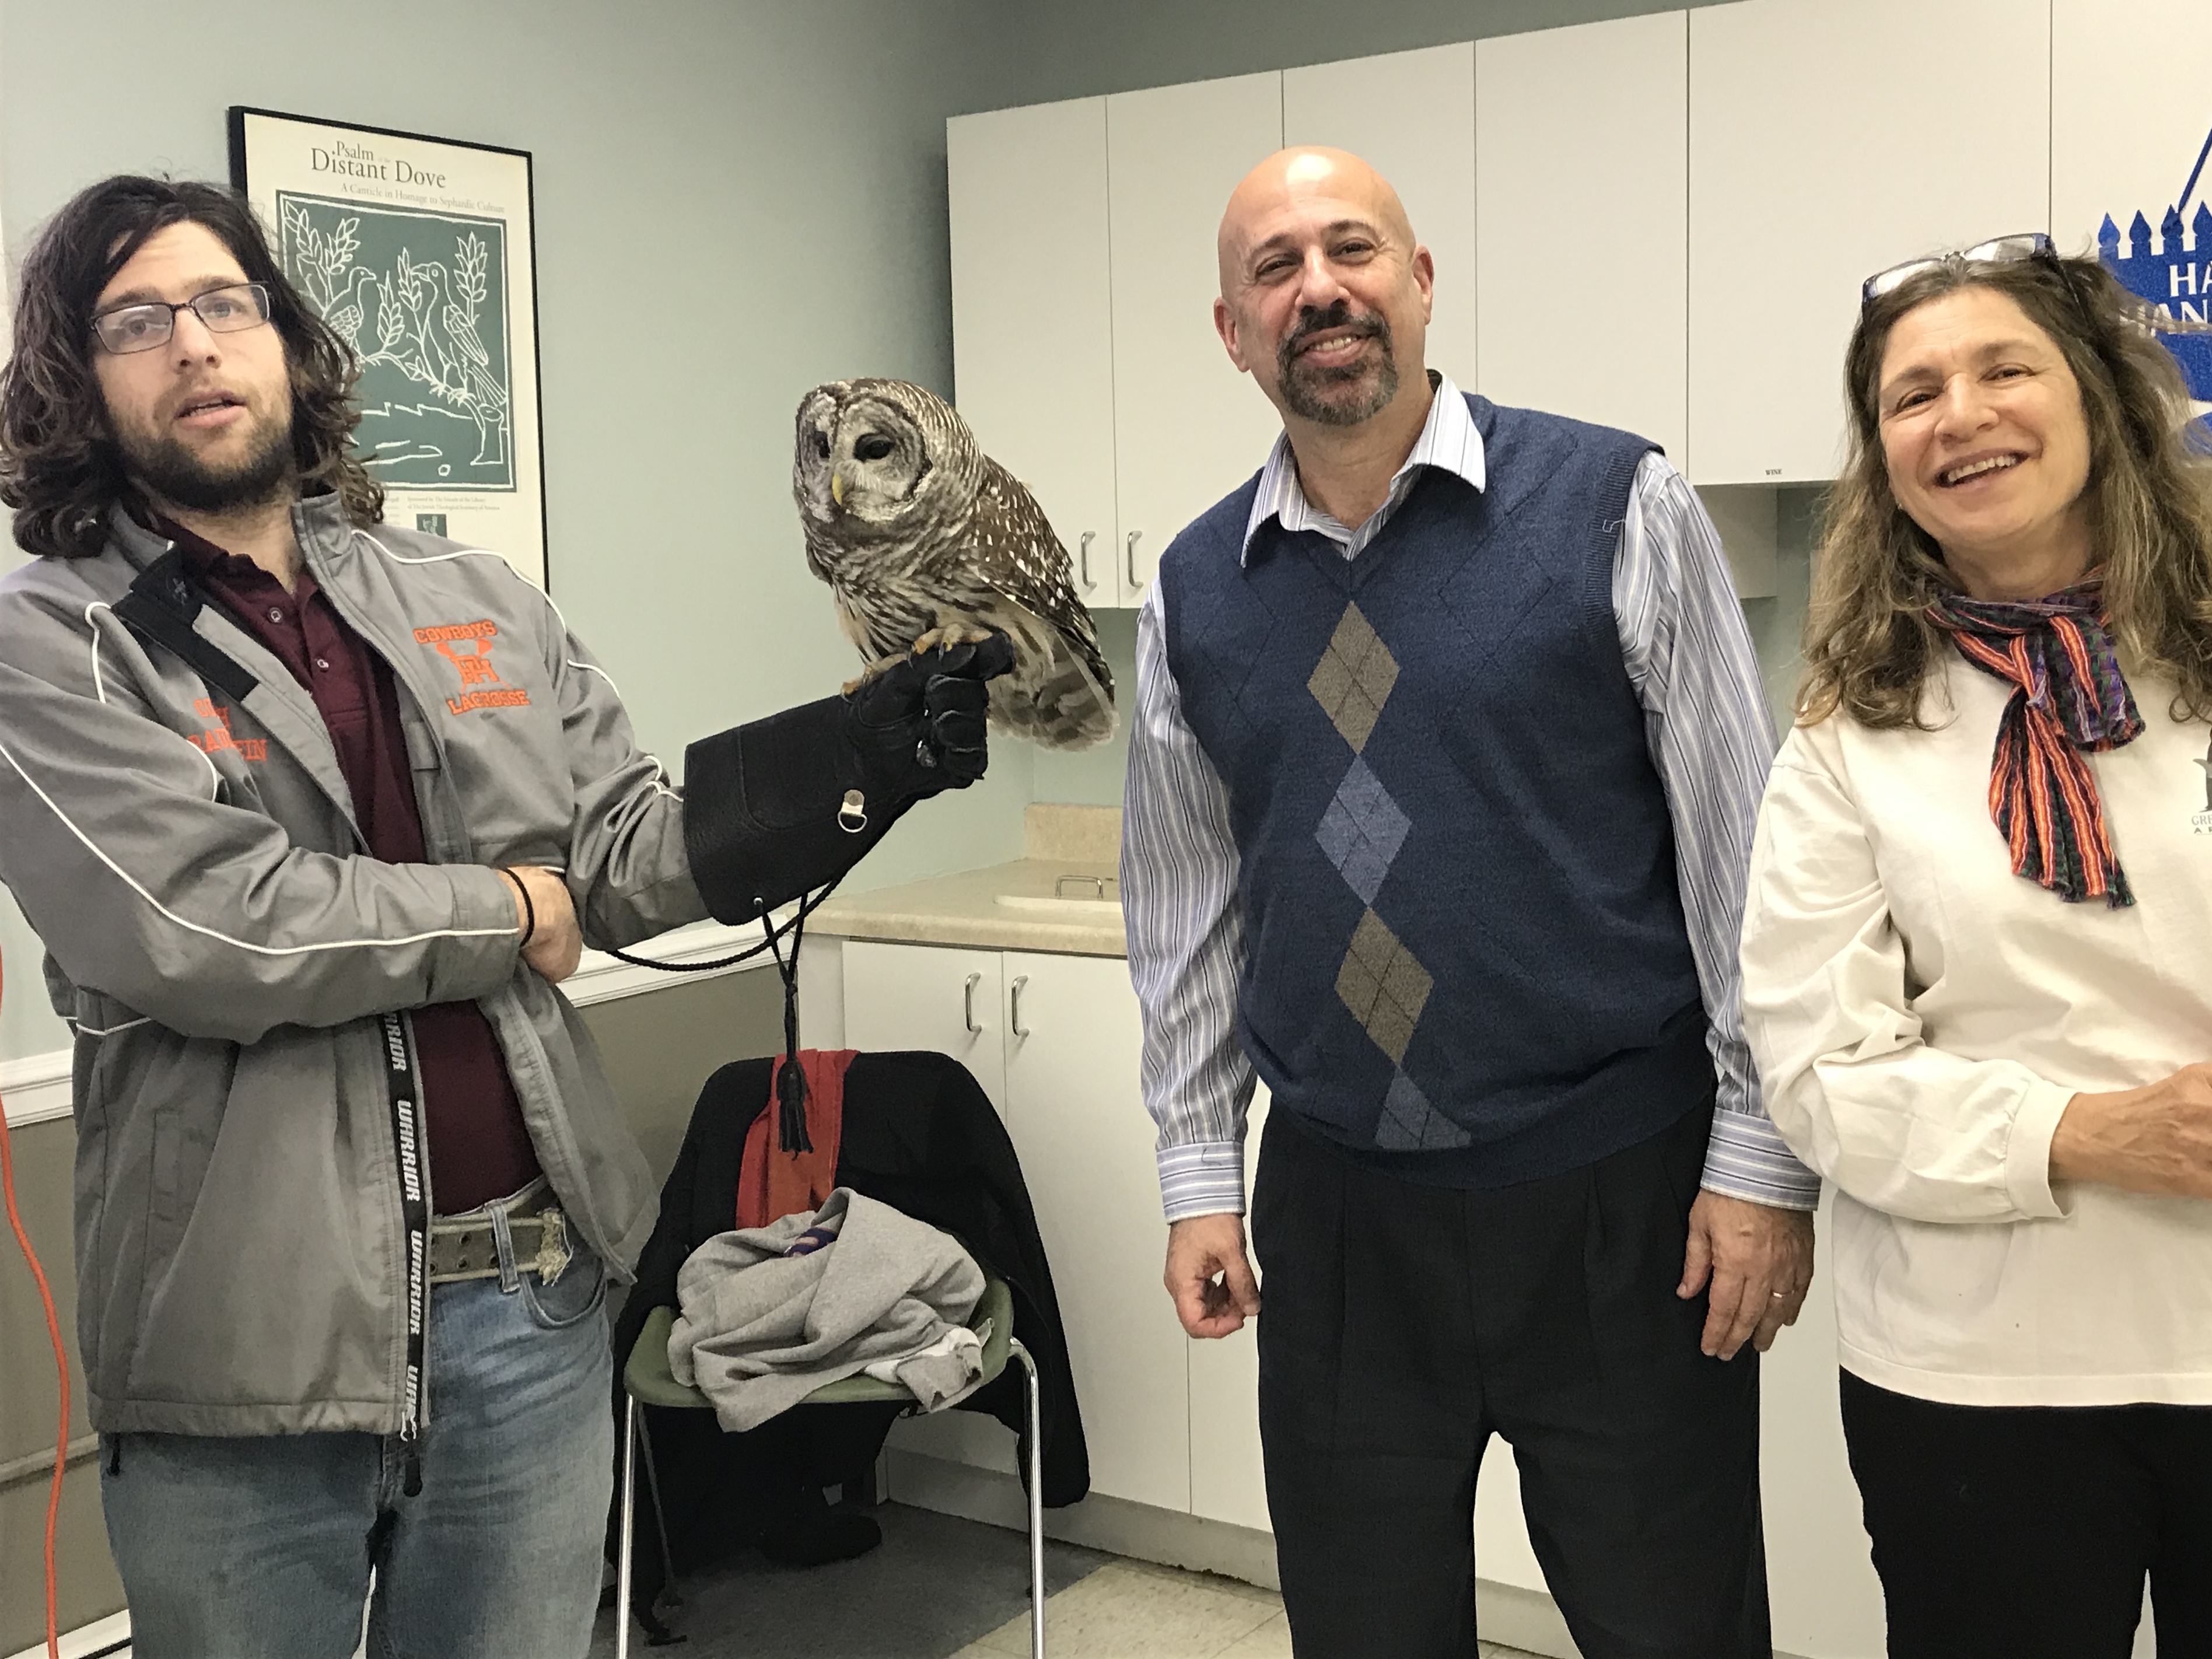 Mitzi (a barred owl) and her human Alex visited the Mitzvah Mall to teach us about the Tenafly Nature center. Rabbi Schwartz and Lauren Rowland grabbed a photo opportunity.